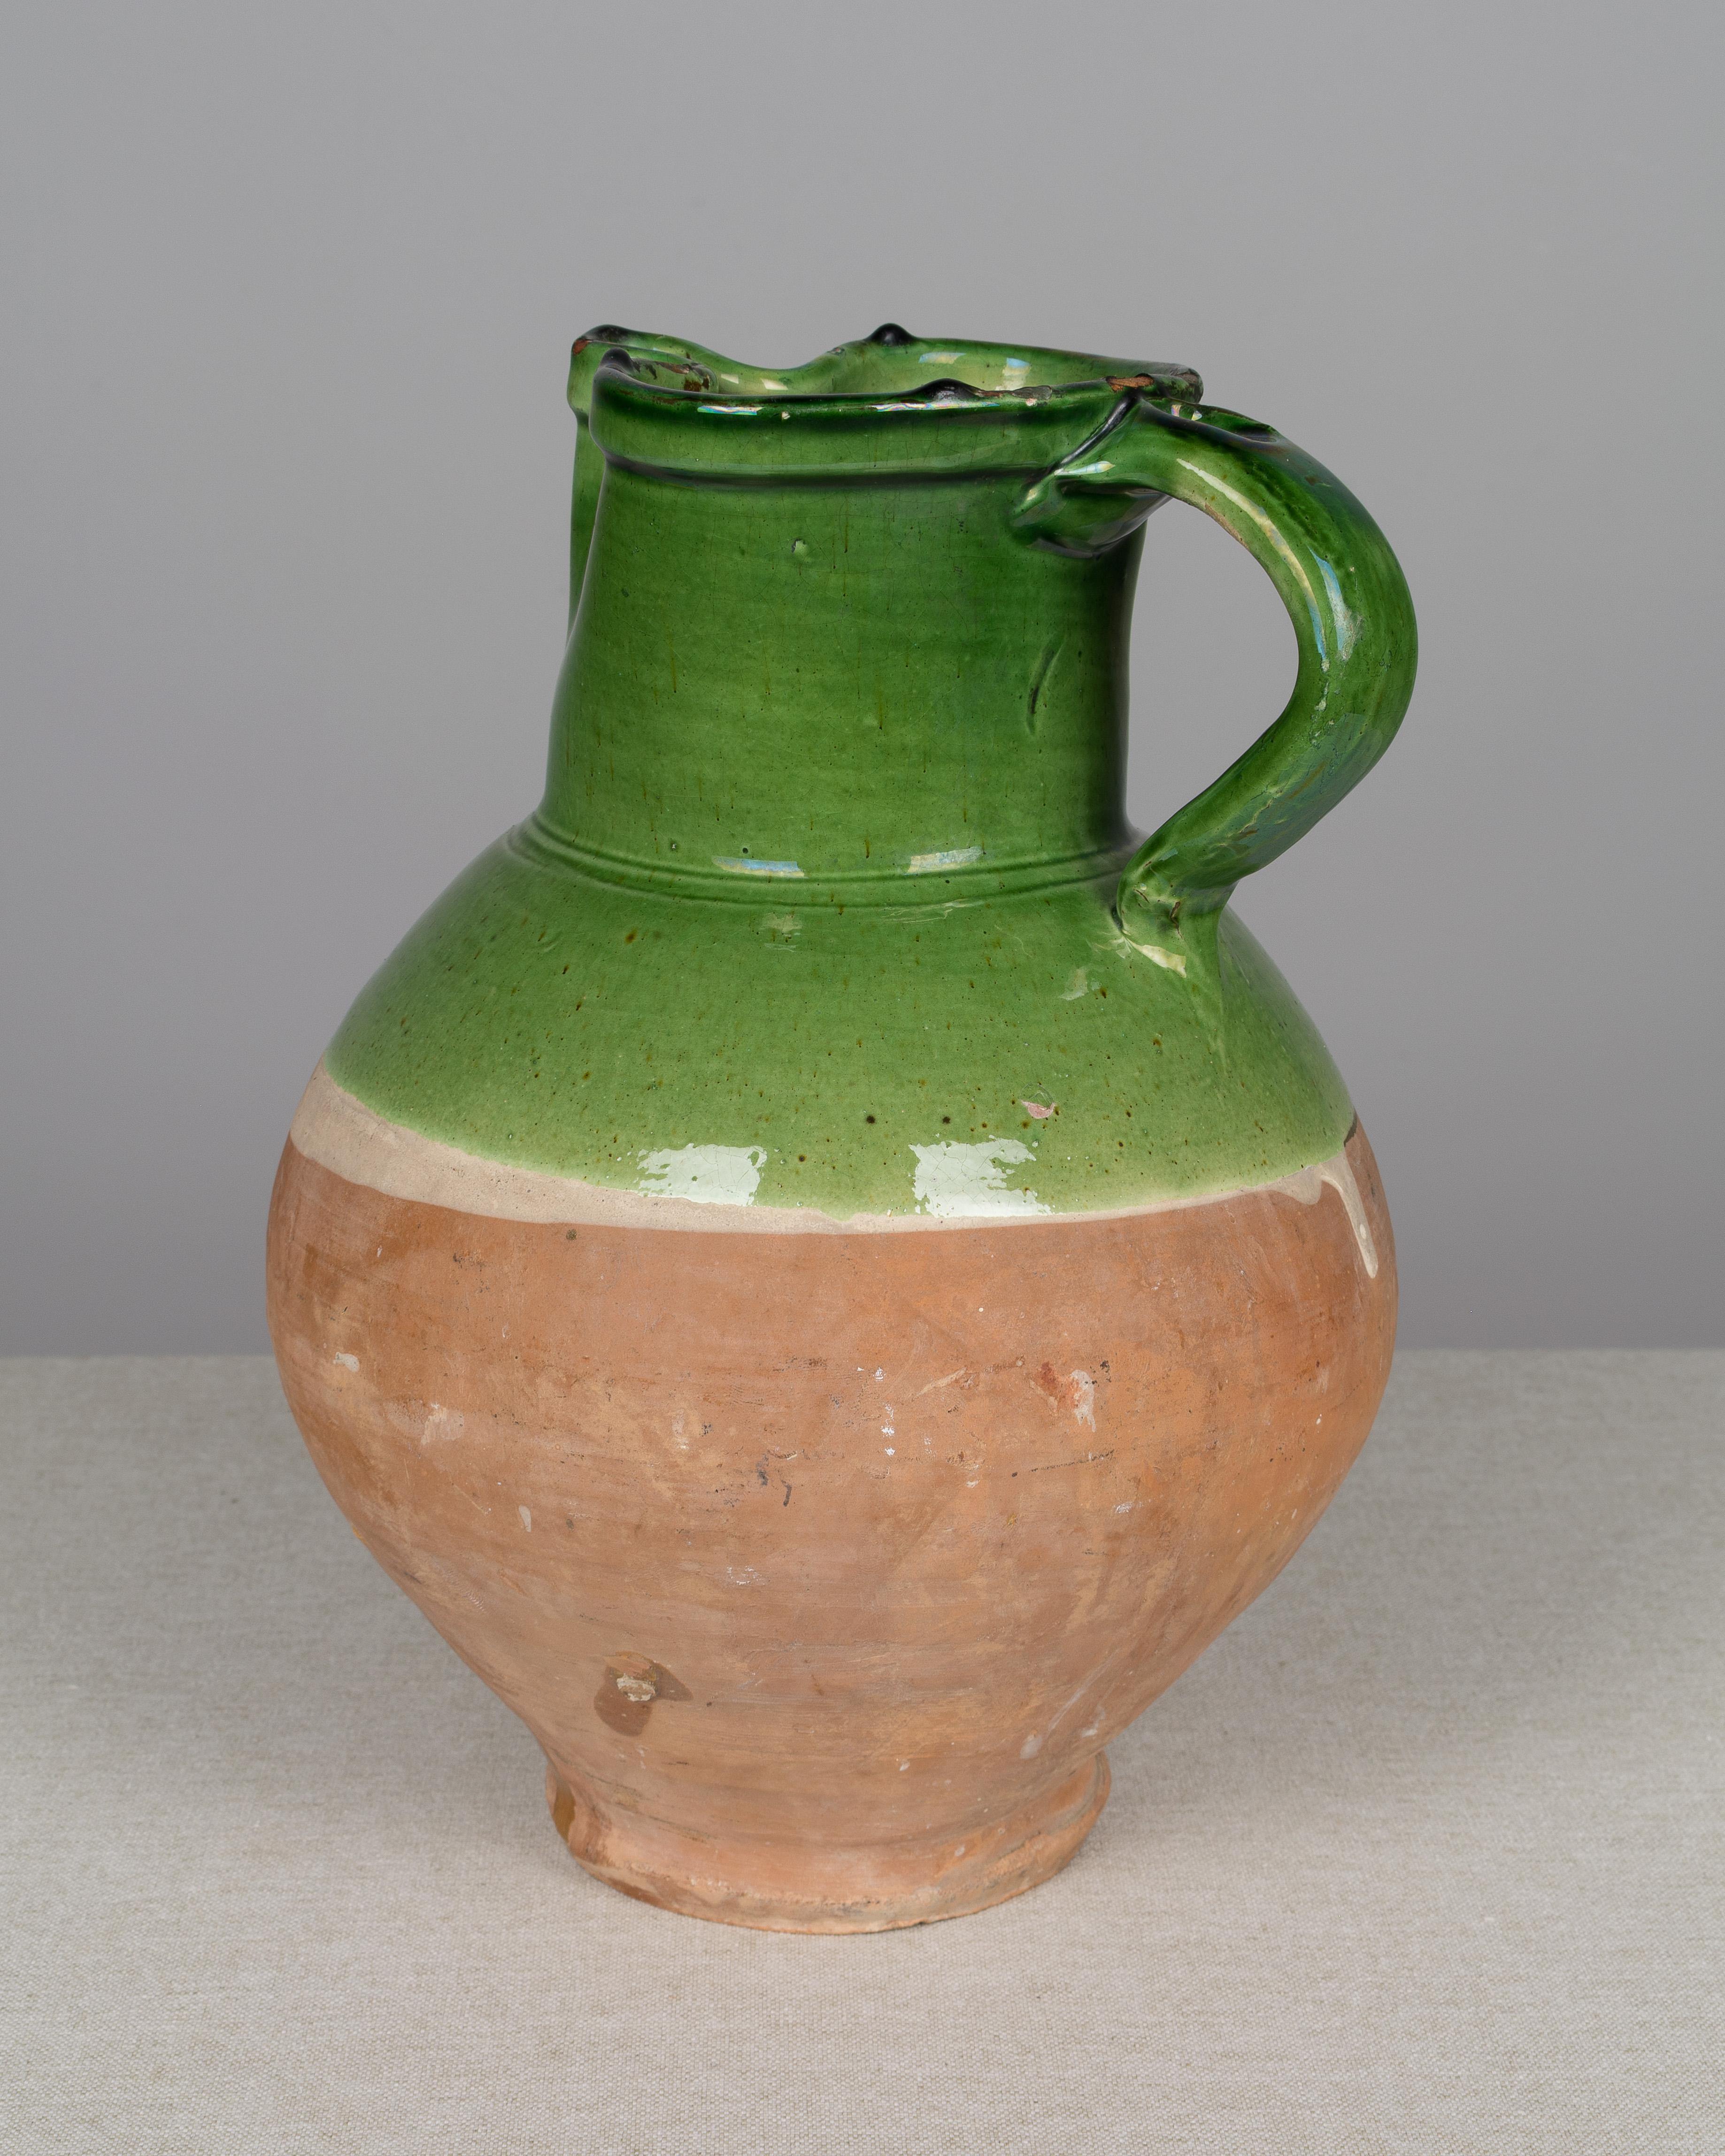 A 19th century French green glazed terracotta water pitcher. In good condition with no cracks, but there are several chips to the glaze around the rim.